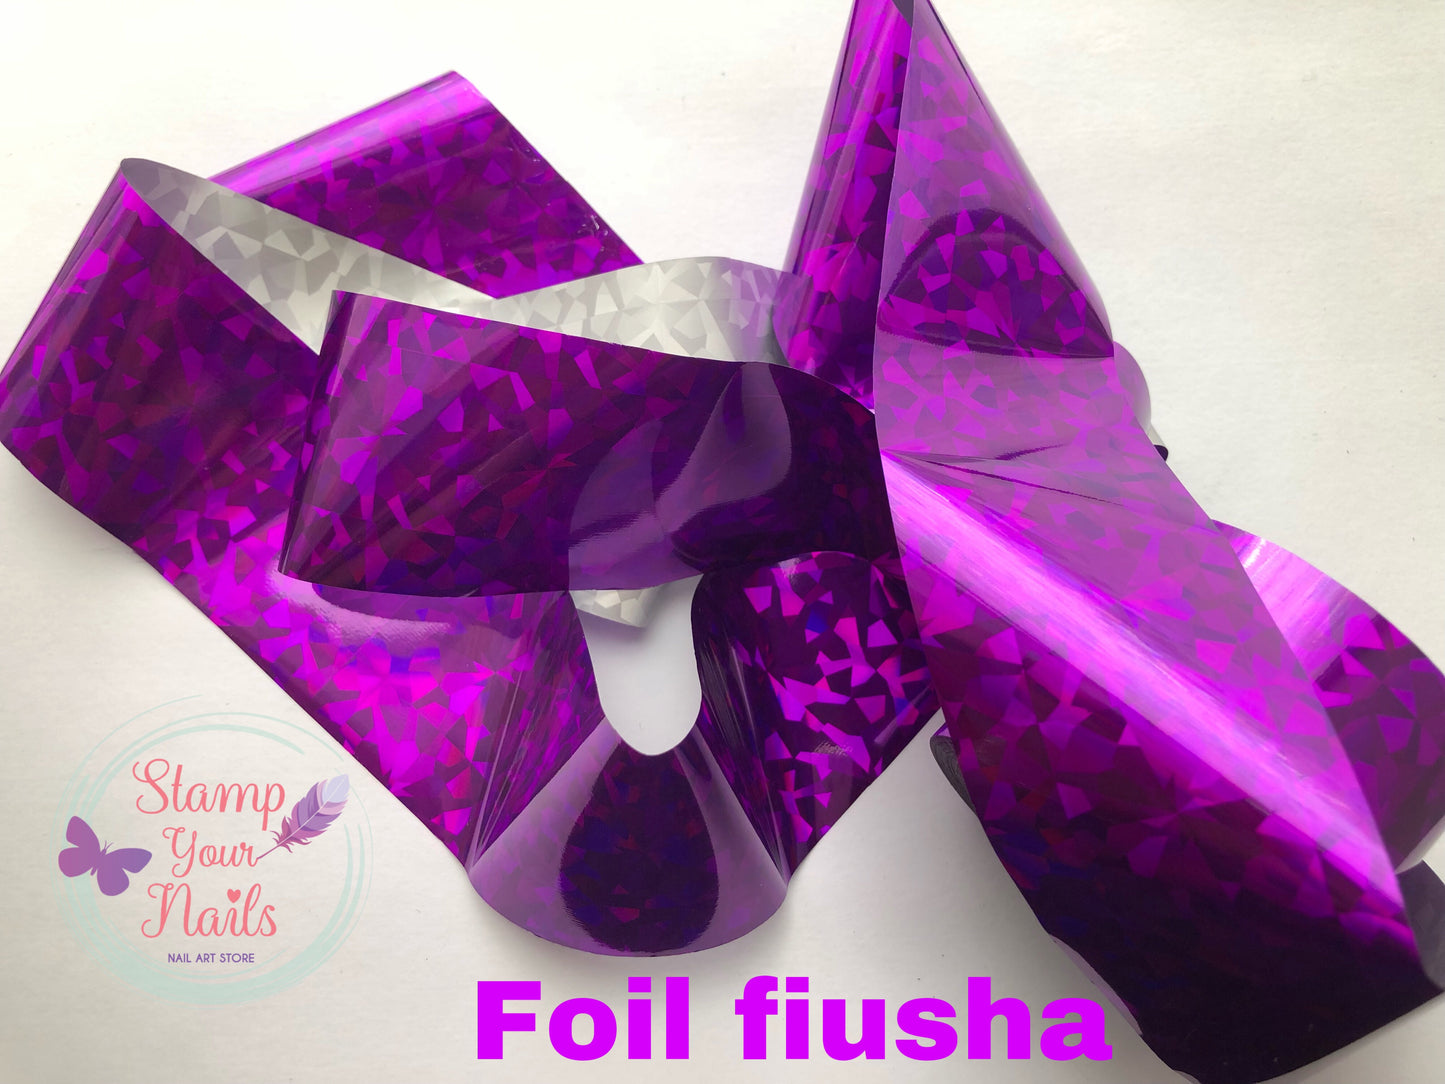 Foil fiusha - Stamp your nails